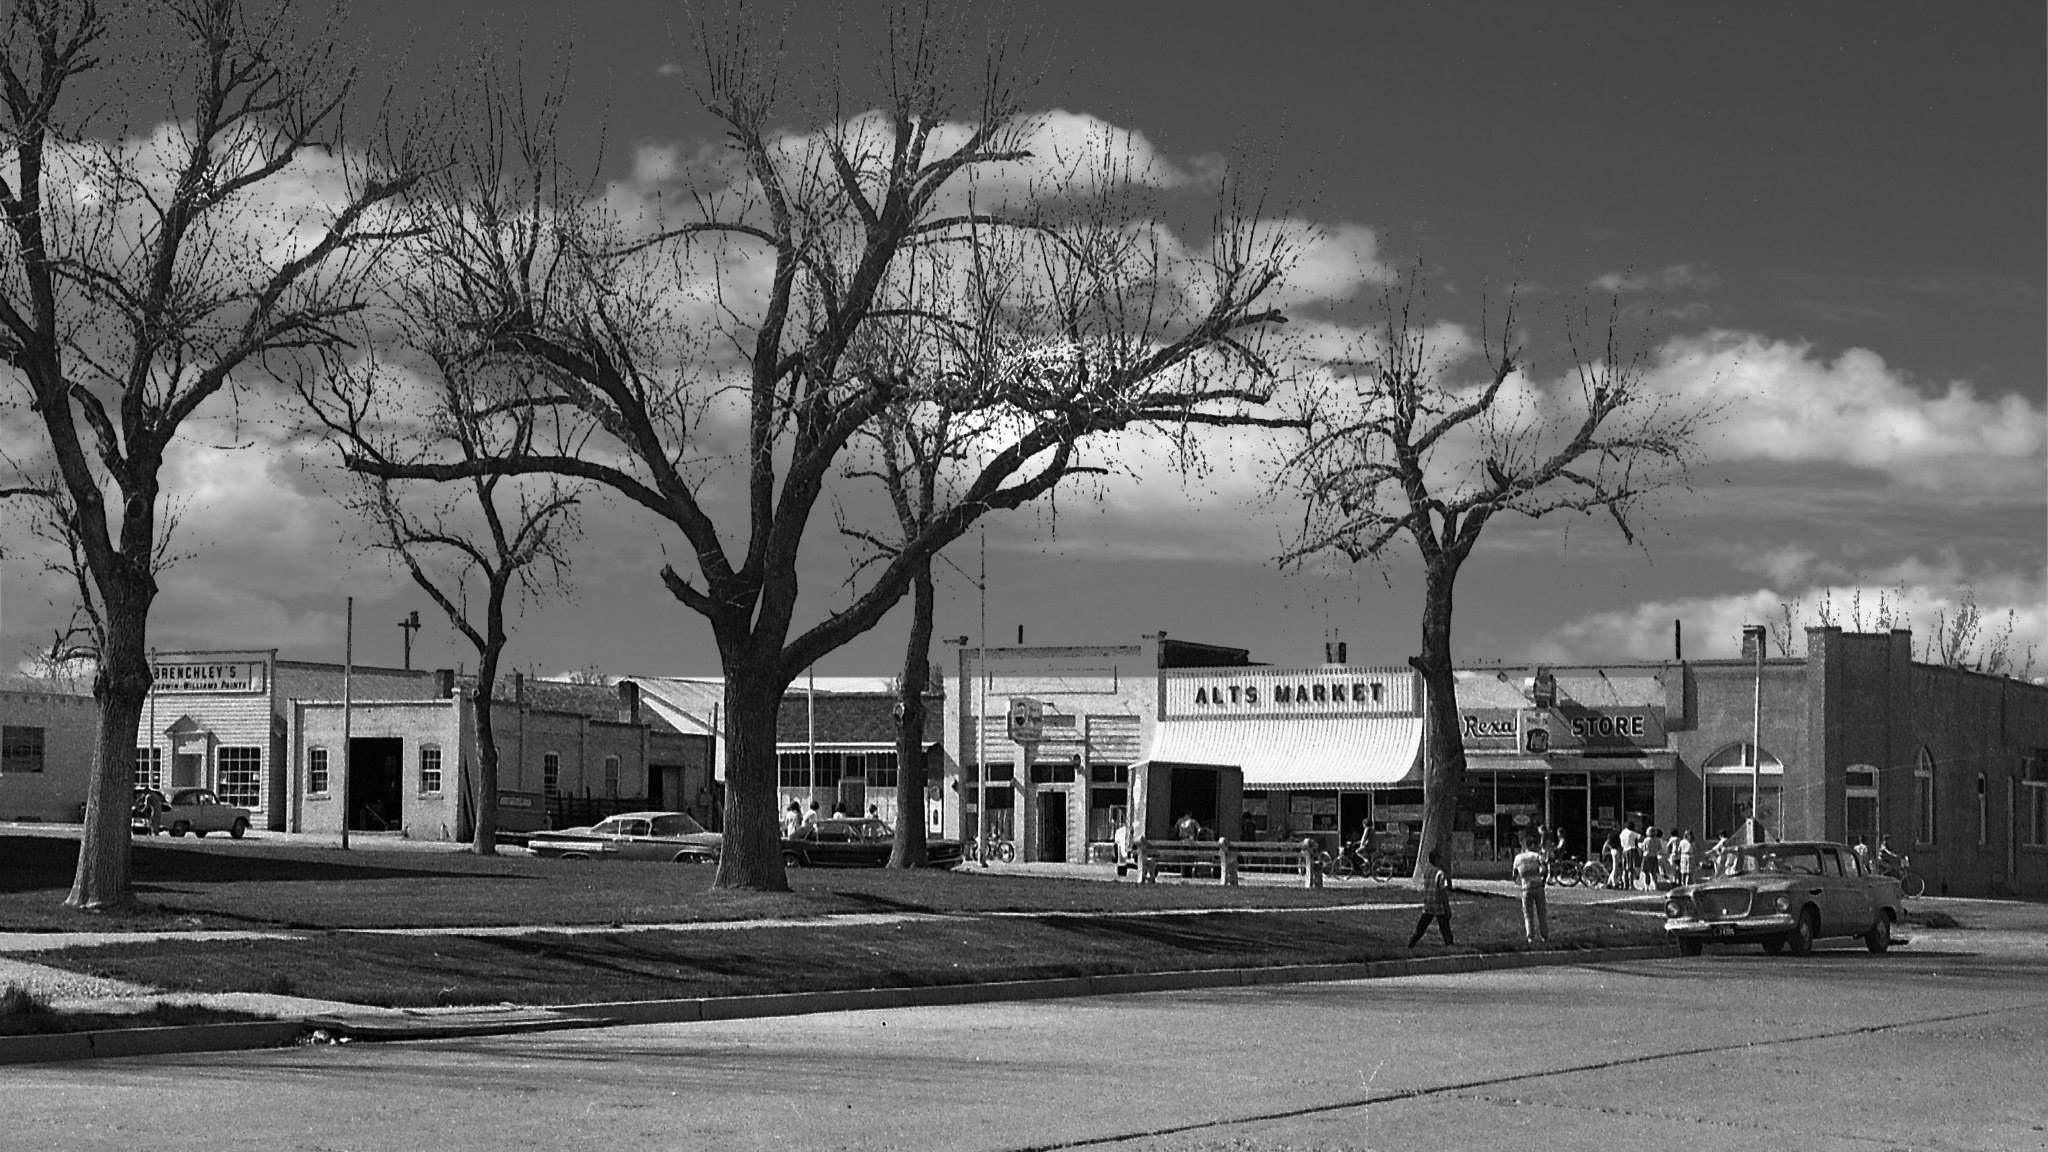 Wellsville Downtown approximately 1965